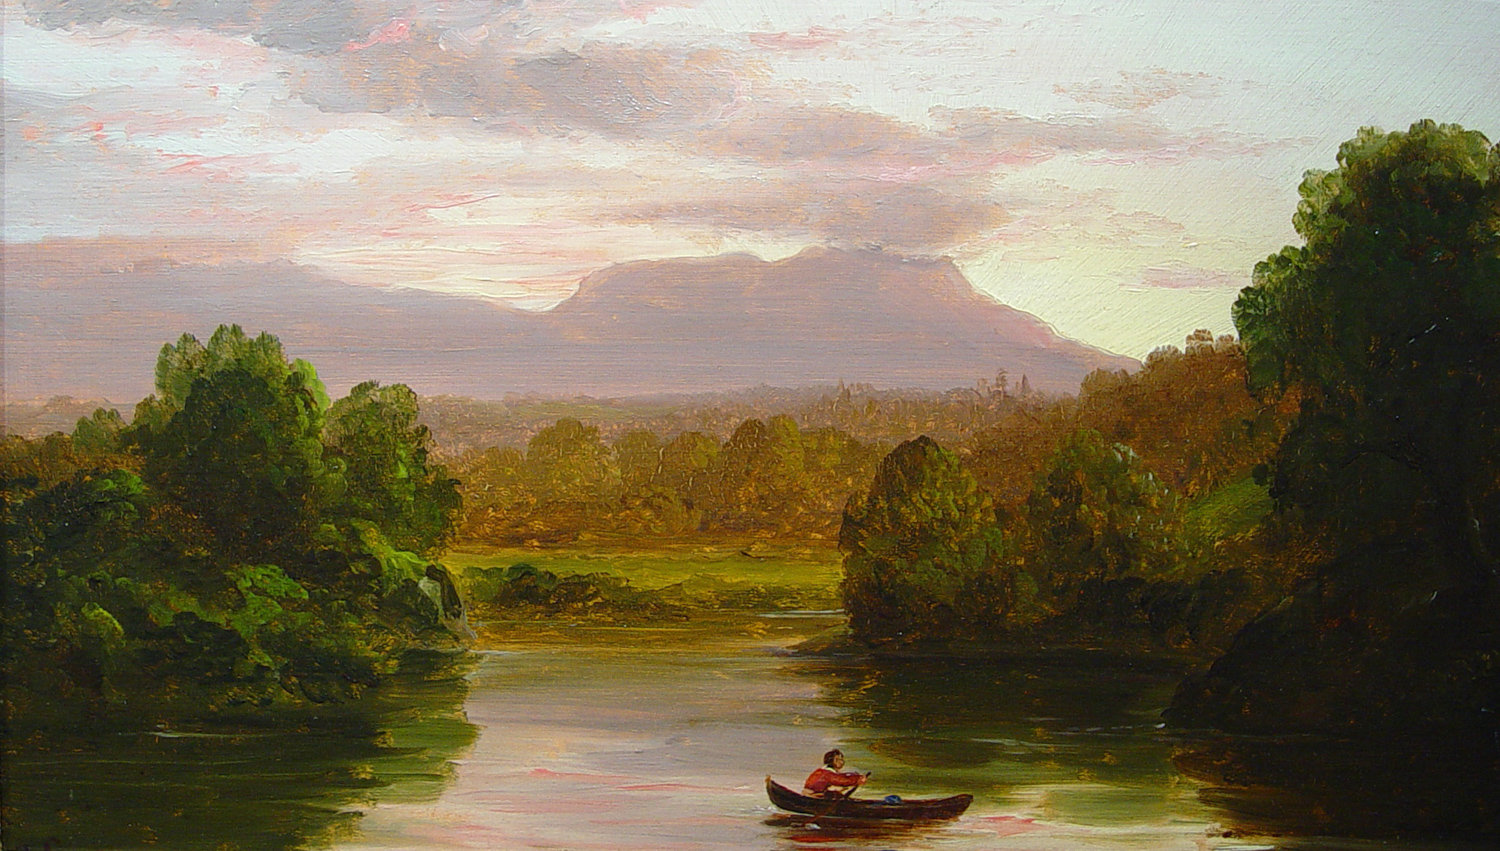 The exhibition 'Thomas Cole's Refrain: The Paintings of Catskill Creek' brings together a dozen of Cole's paintings of the creek, like this one, and paintings by artists inspired by Cole — all of which are on display at the Hudson River Museum through Feb. 23.